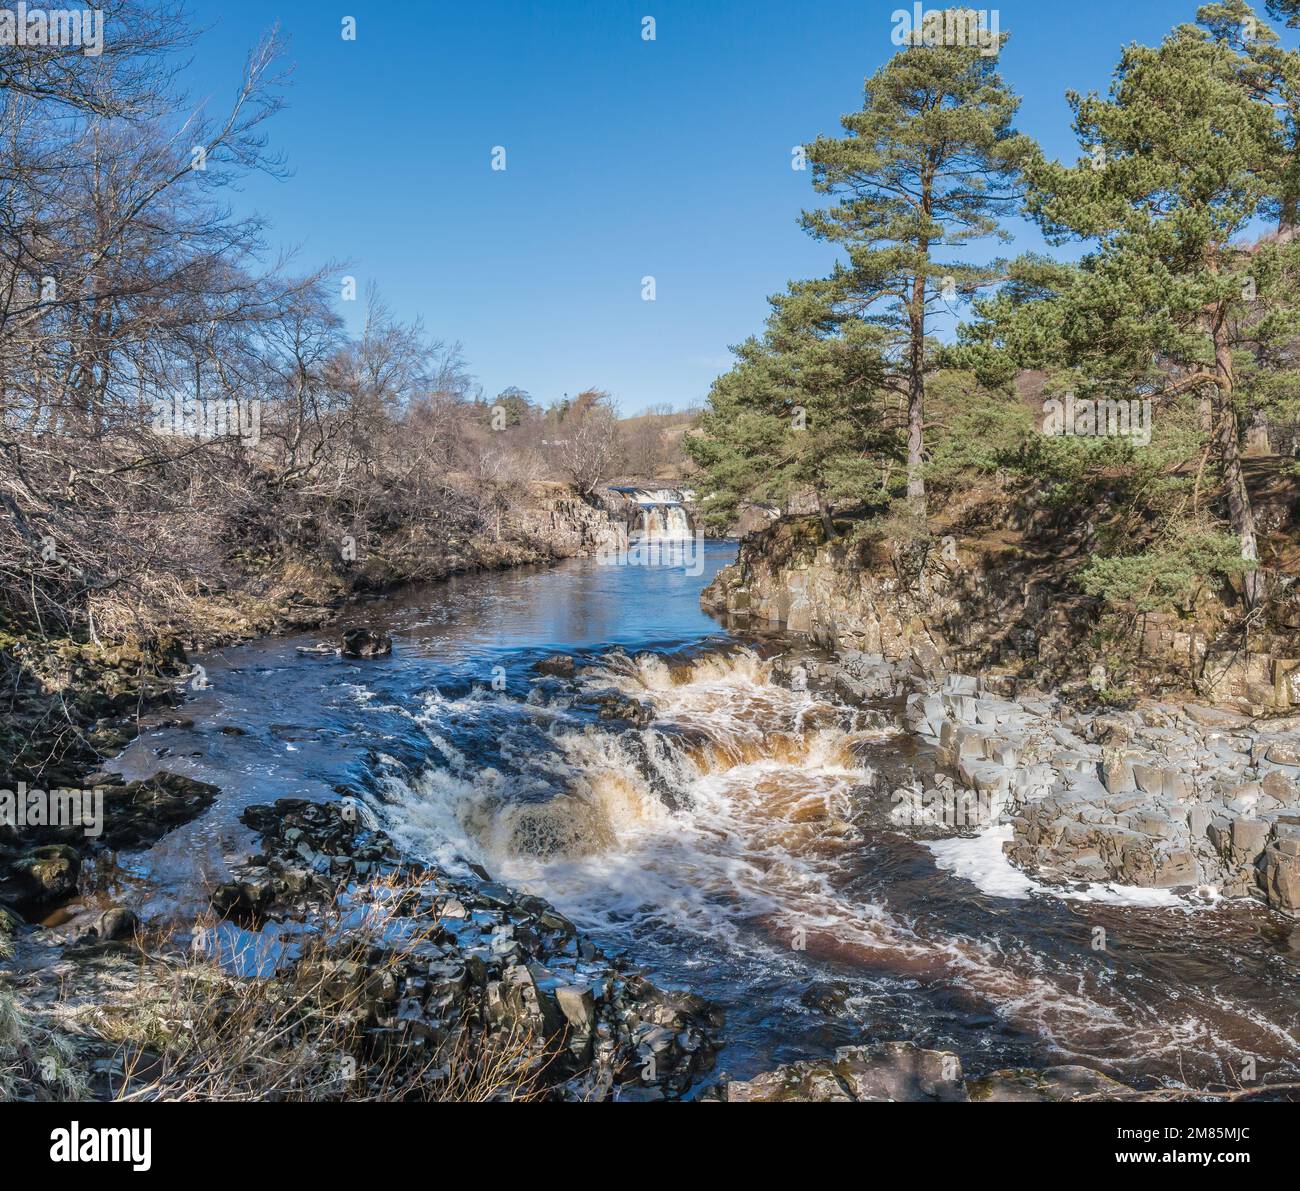 Low Force Waterfall, Teesdale, taken from the Pennine Way at Wynch Bridge in very strong early spring sunshine Stock Photo